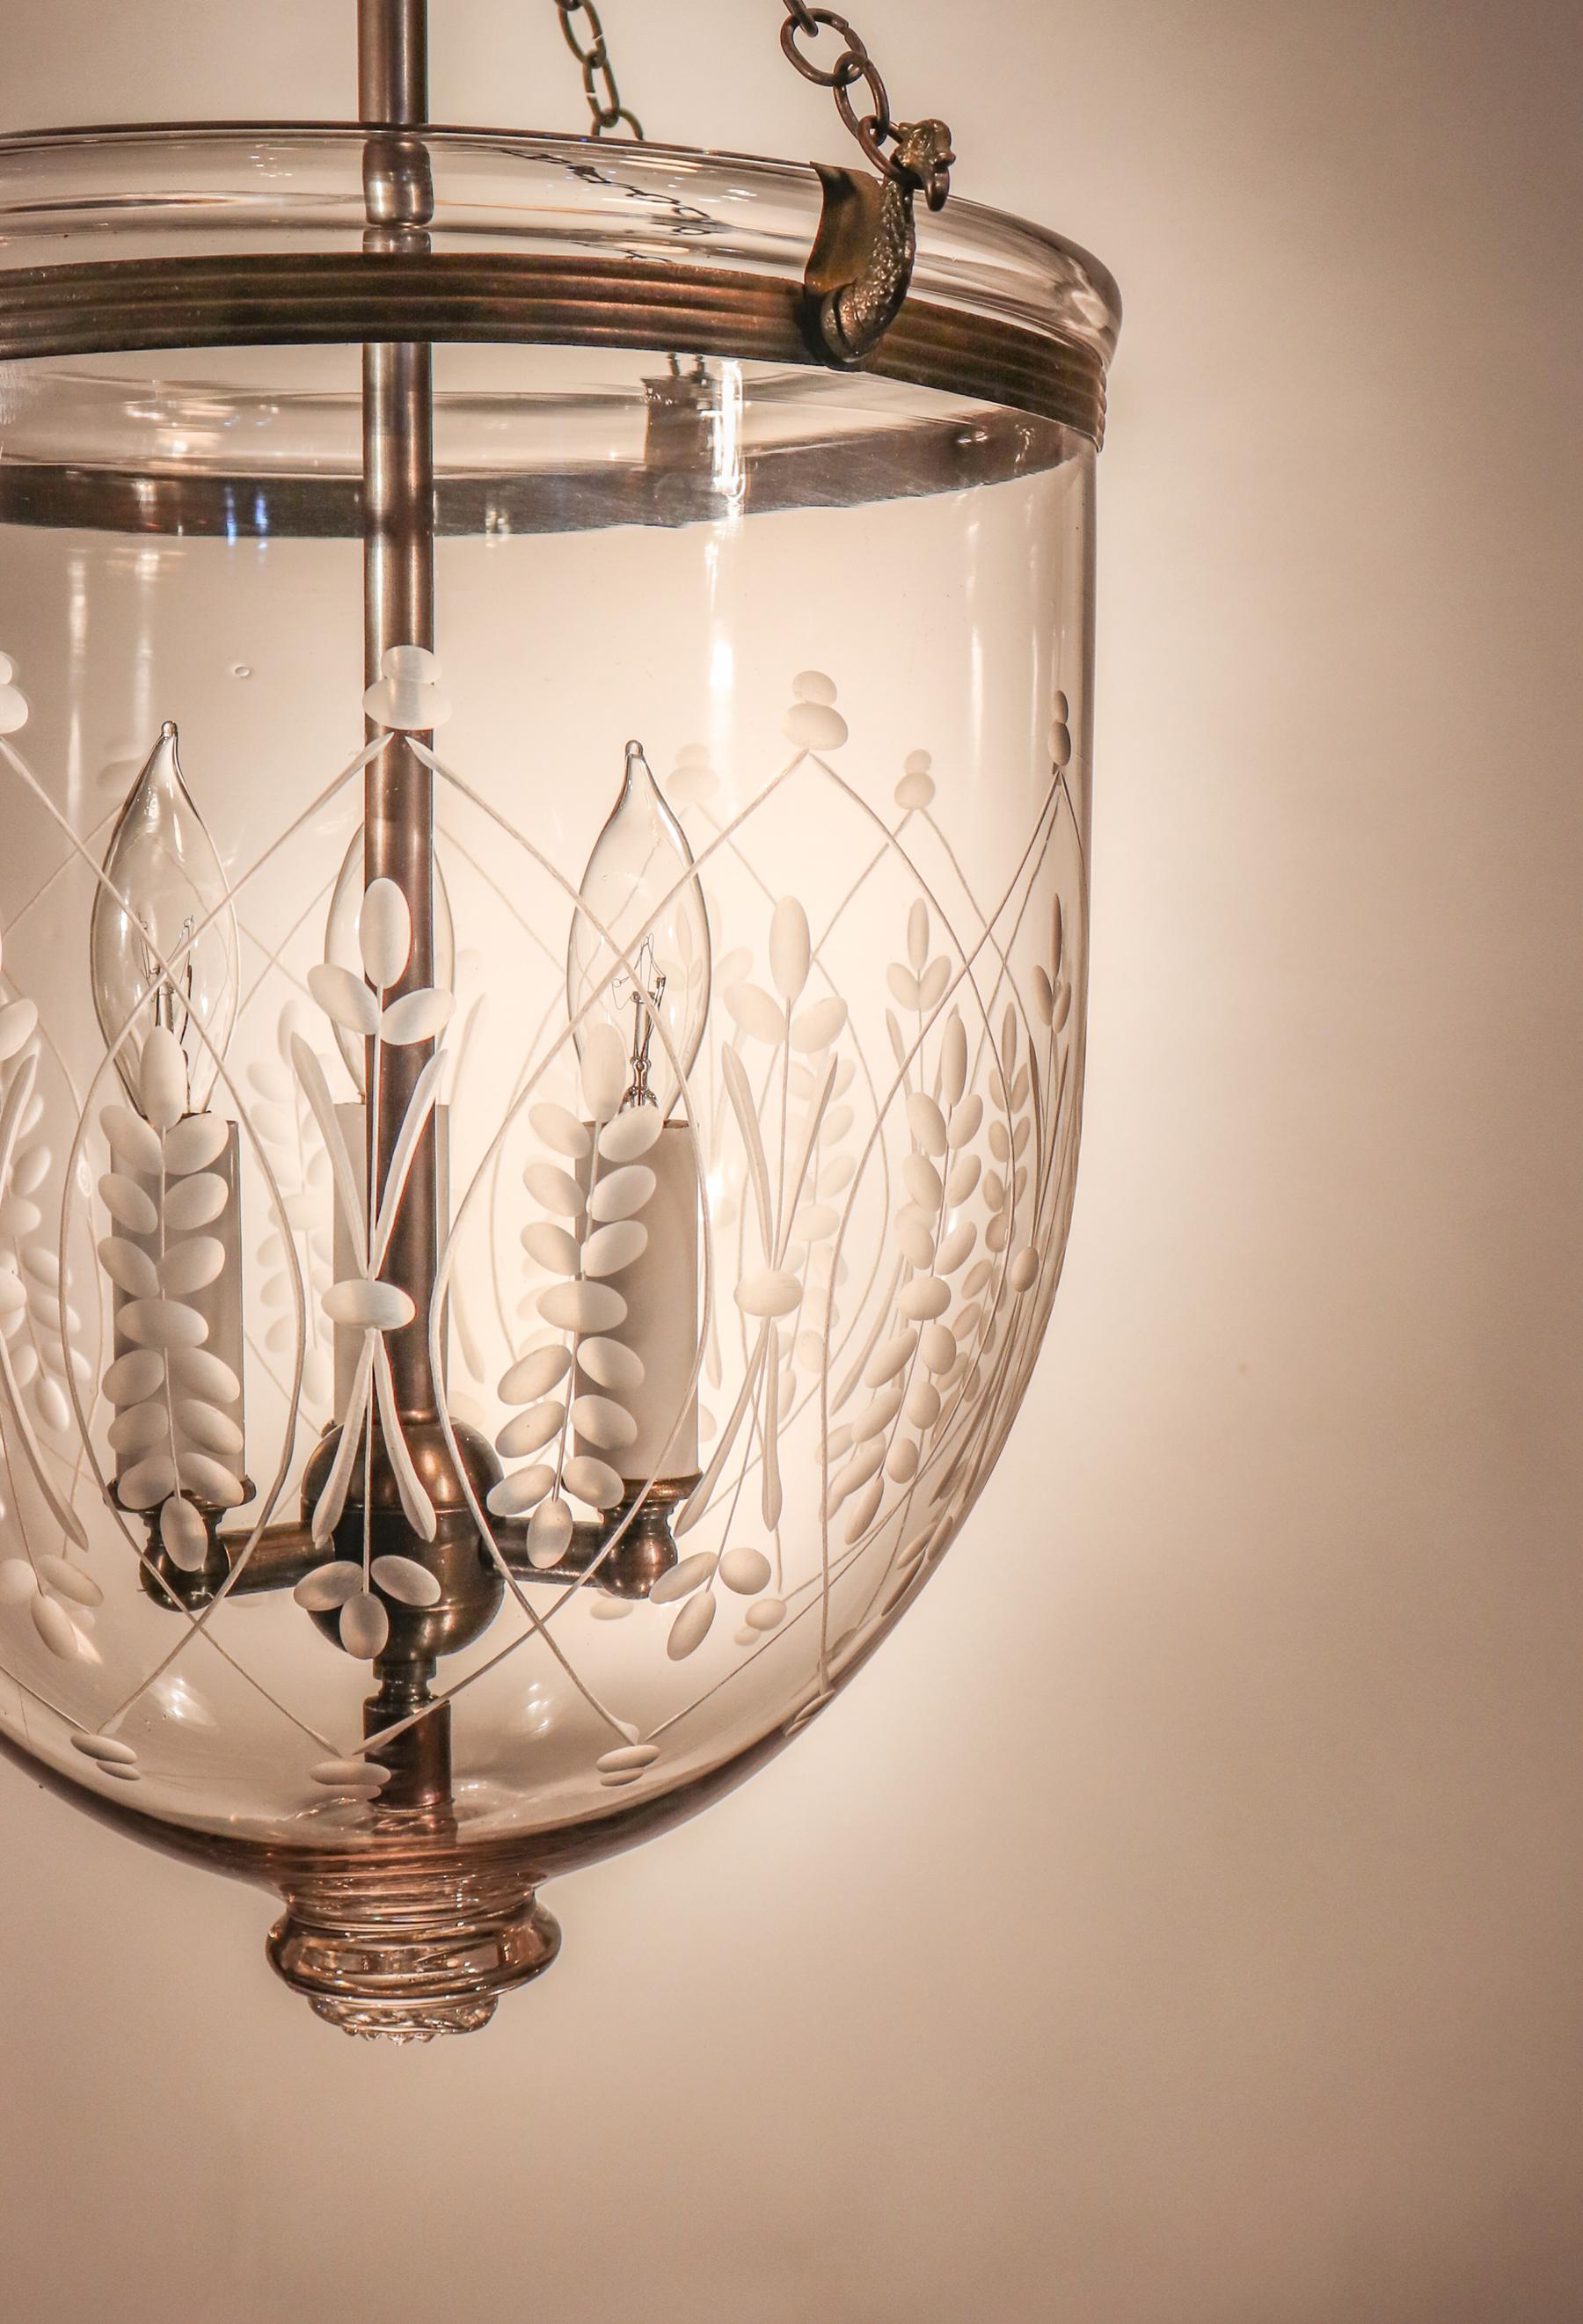 Etched Antique Bell Jar Lantern with Wheat Etching